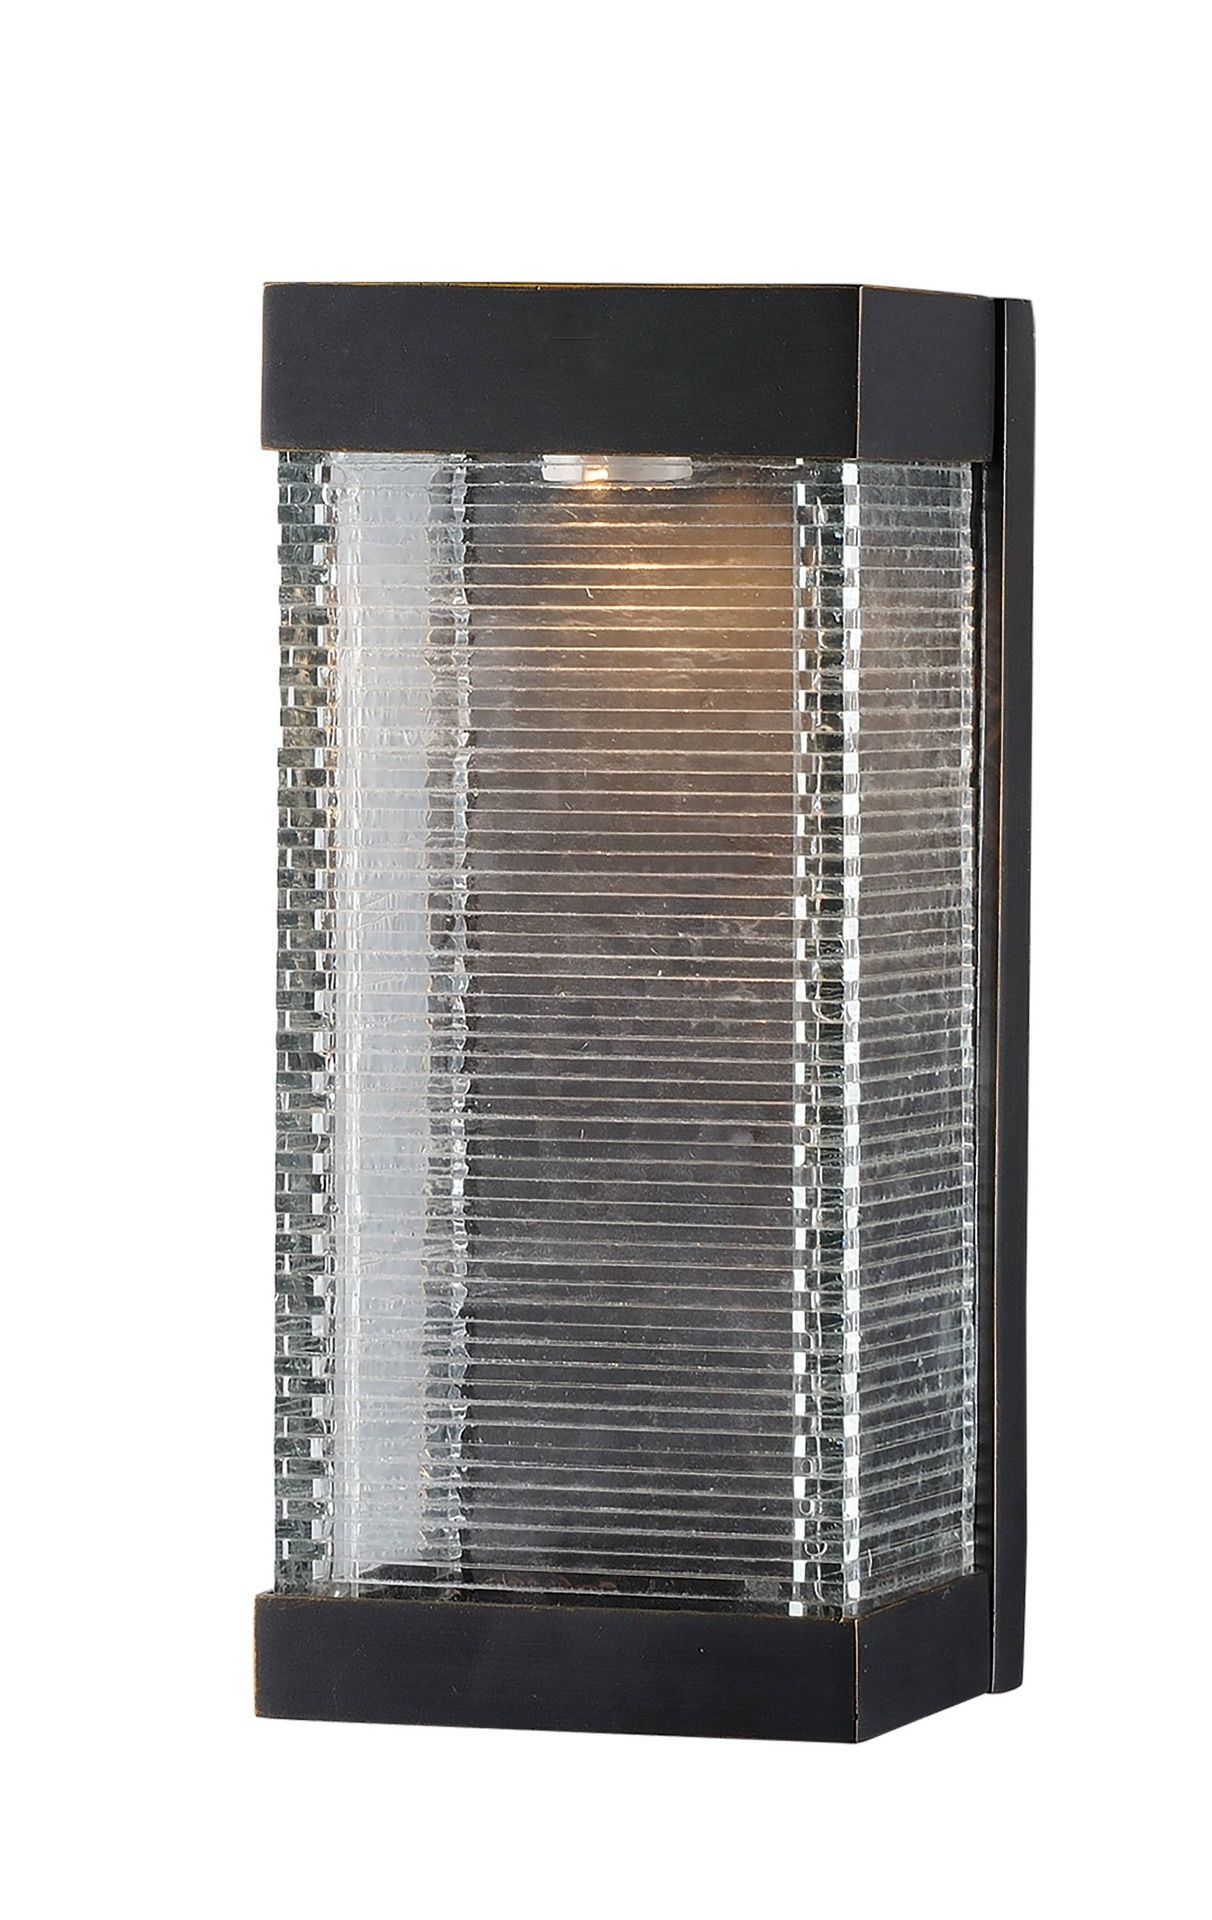 STACKHOUSE VX LED OUTDOOR WALL SCONCE 55224CLBZ